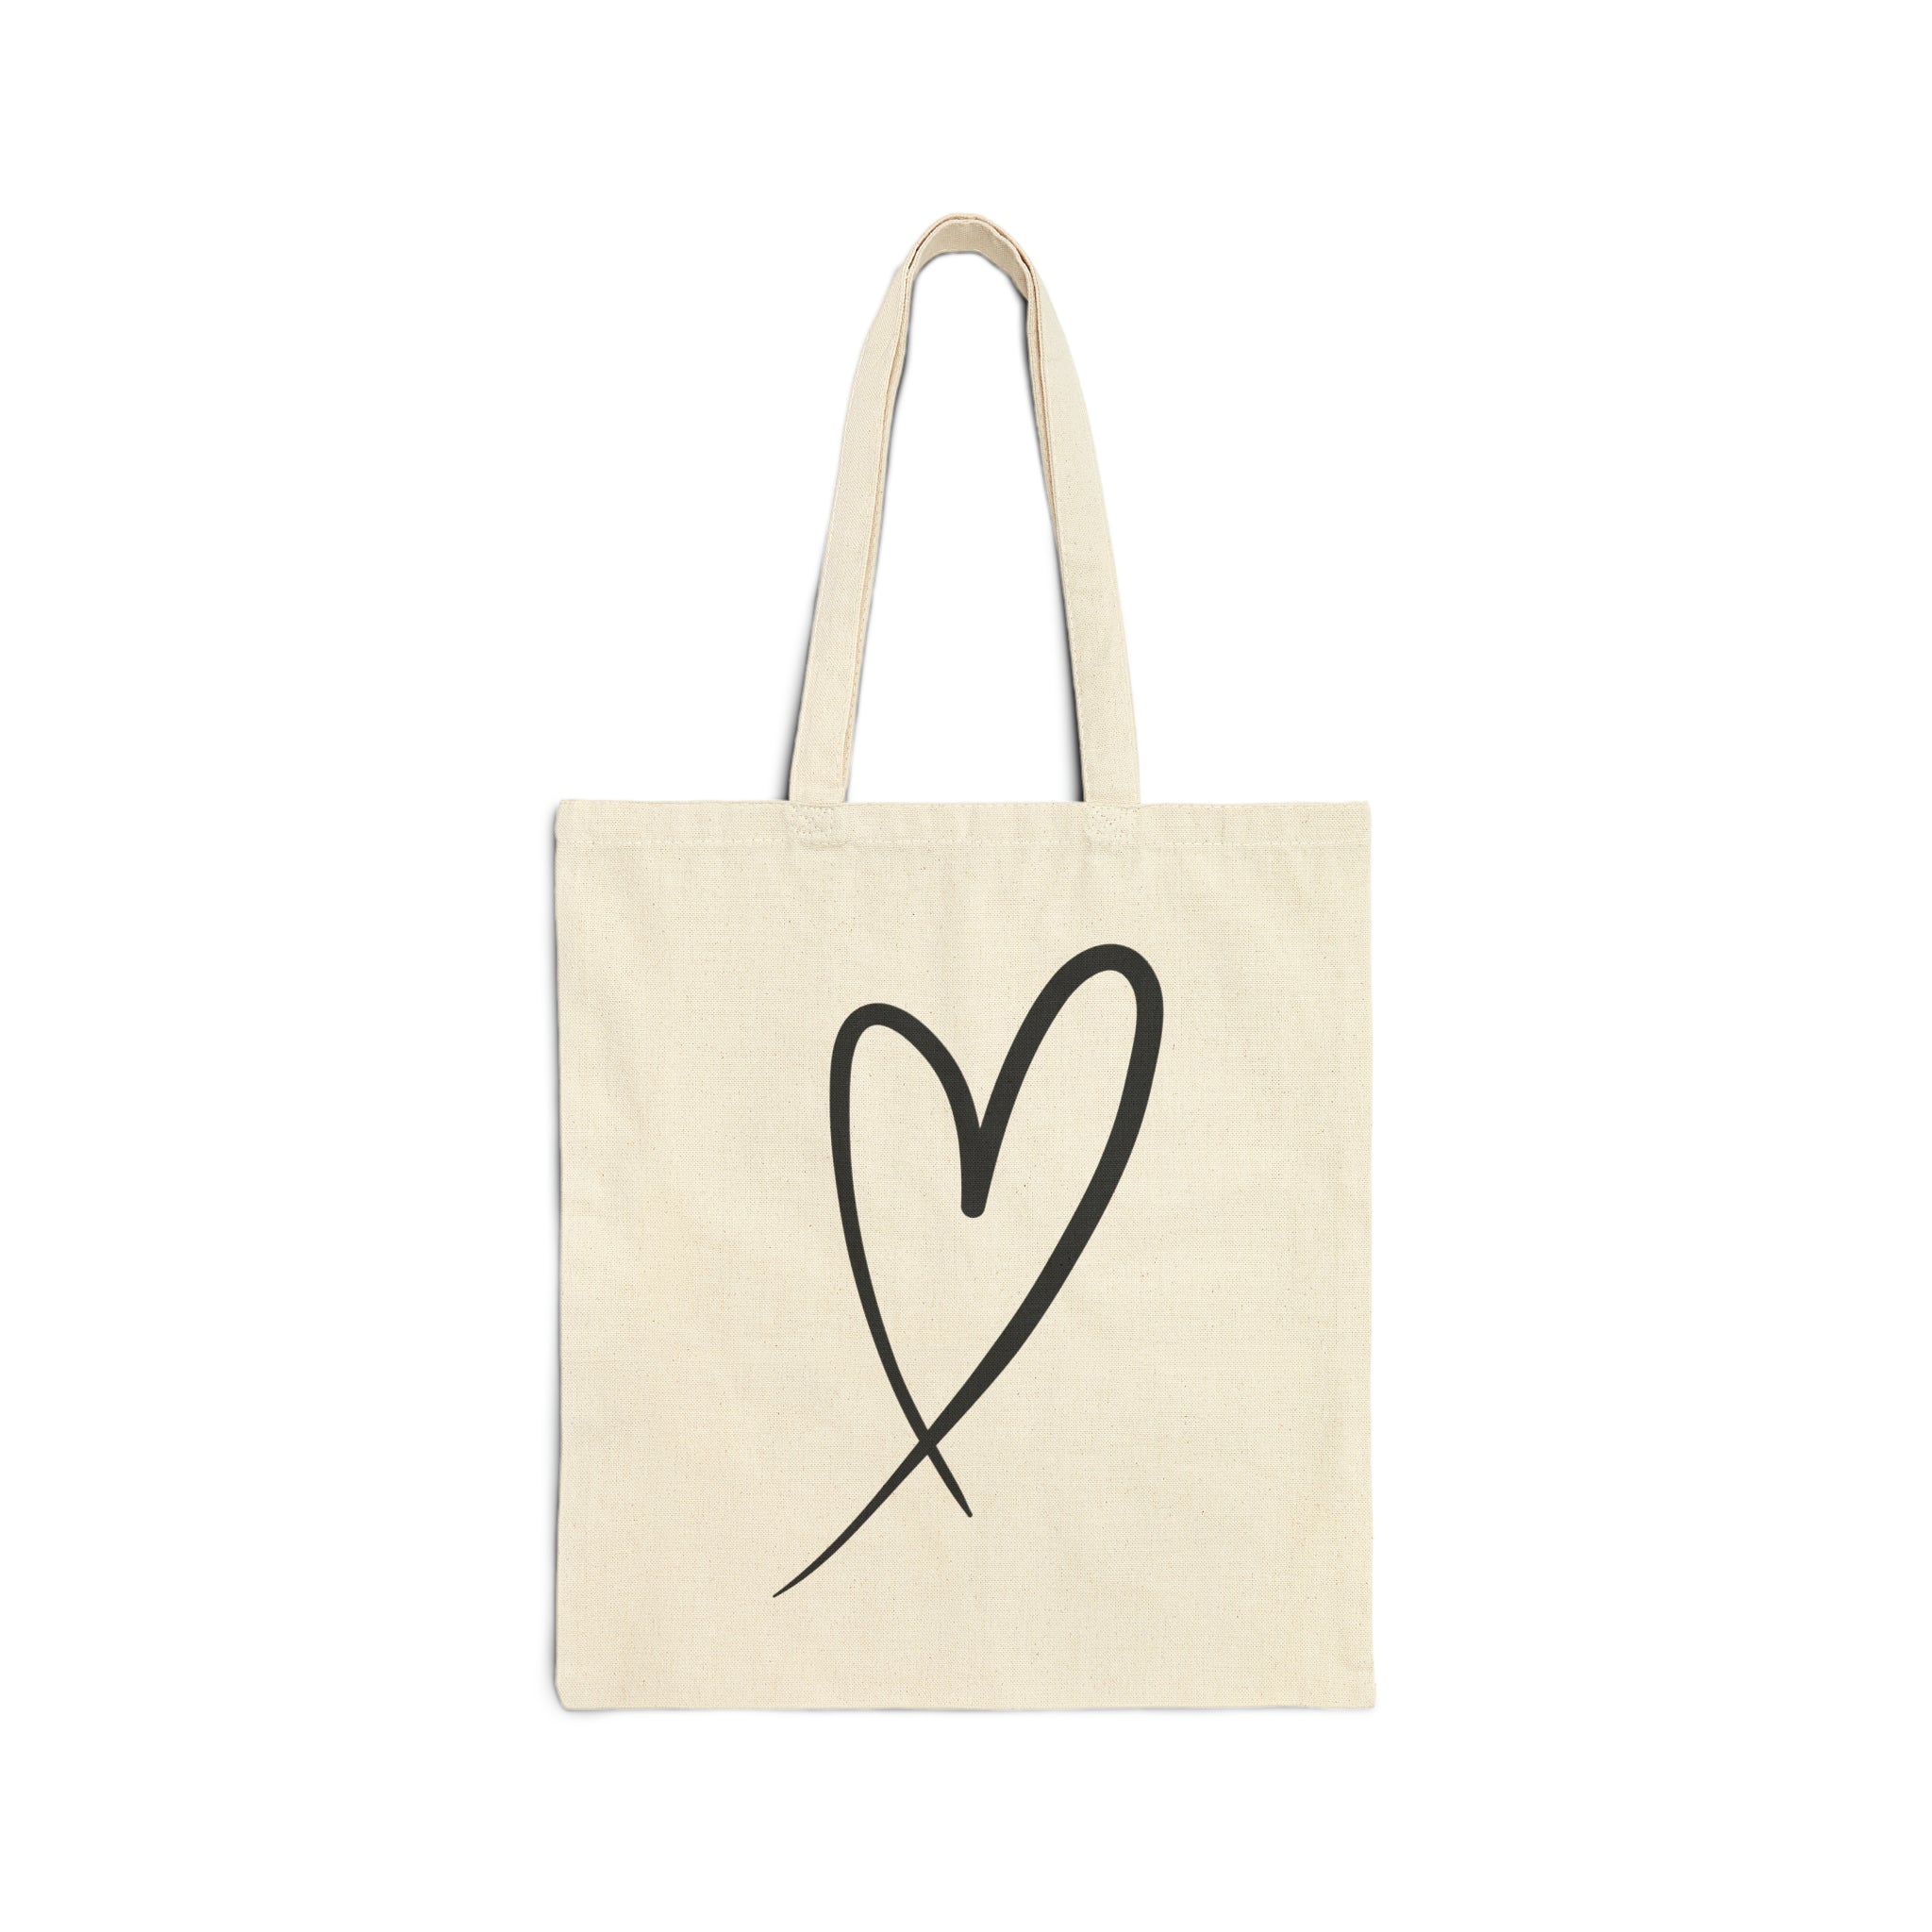 HEART Tote Bag, Fall, Thanksgiving, Gift Under 15, Minimalist, Cute Tote Bag, Gift For Her